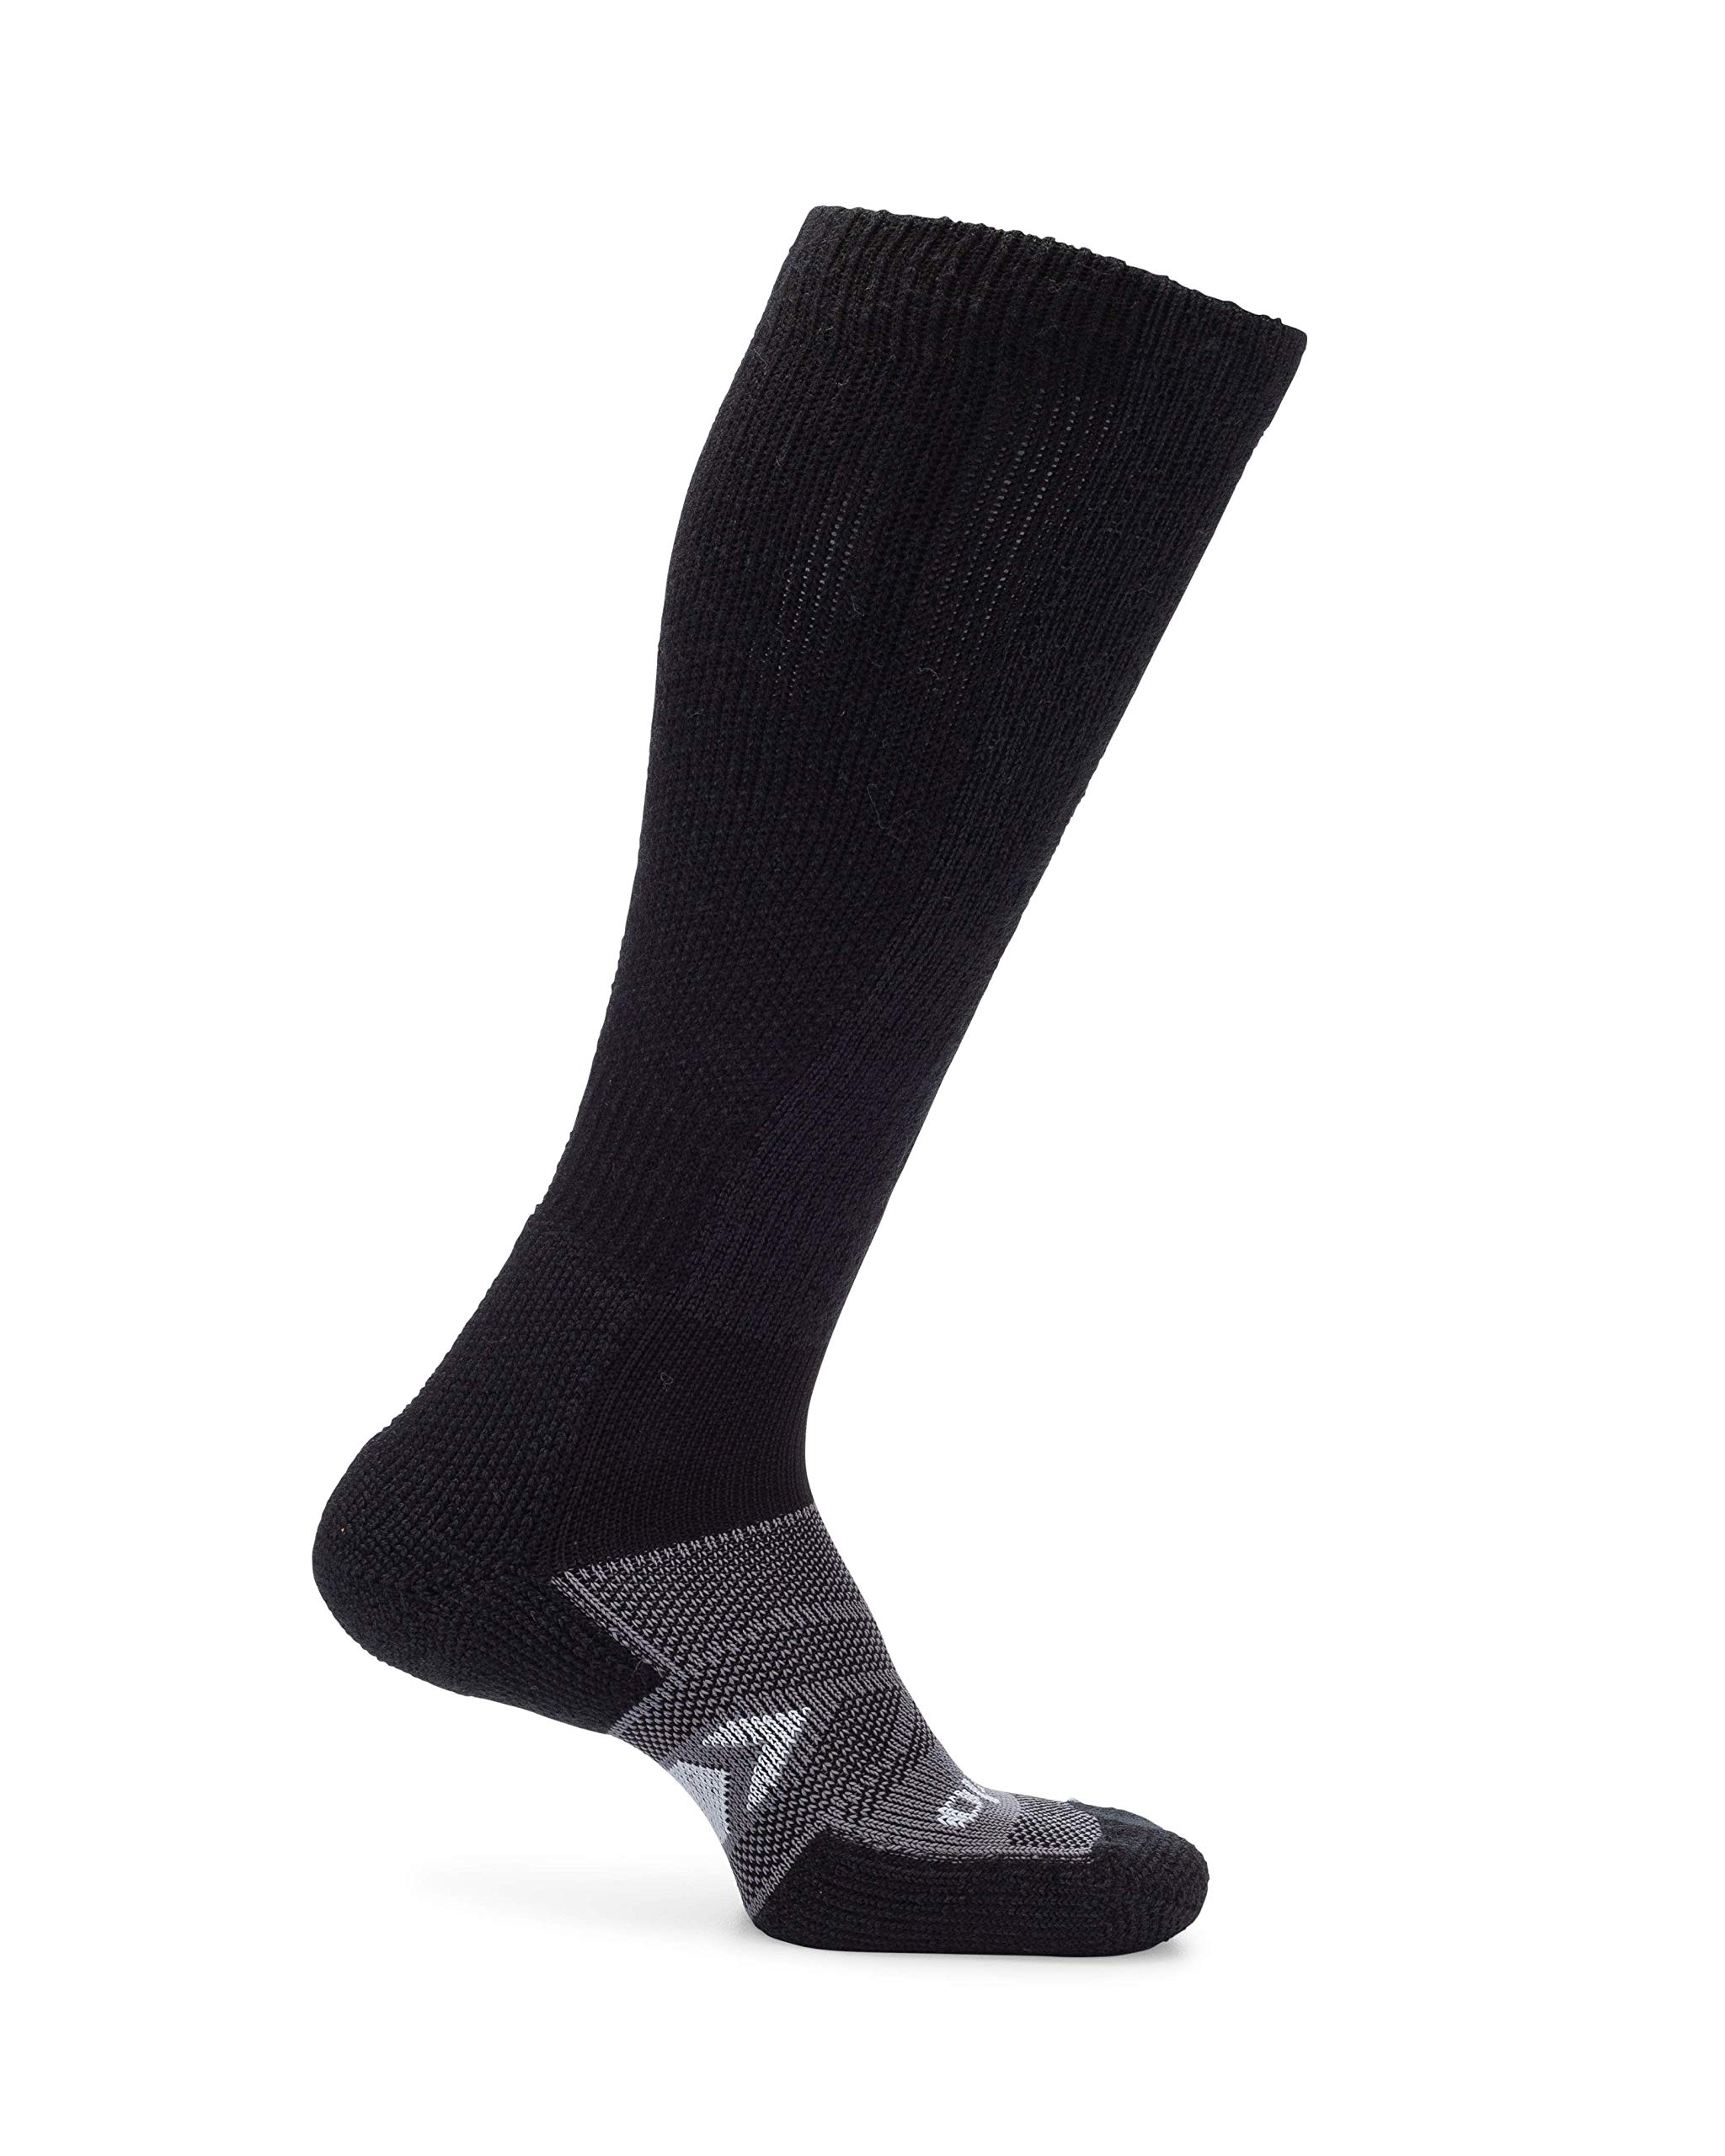 Thorlos Unisex Adult's 12 Hour Shift Thick Padded Over-The-Calf Work Socks, Black/Grey Large